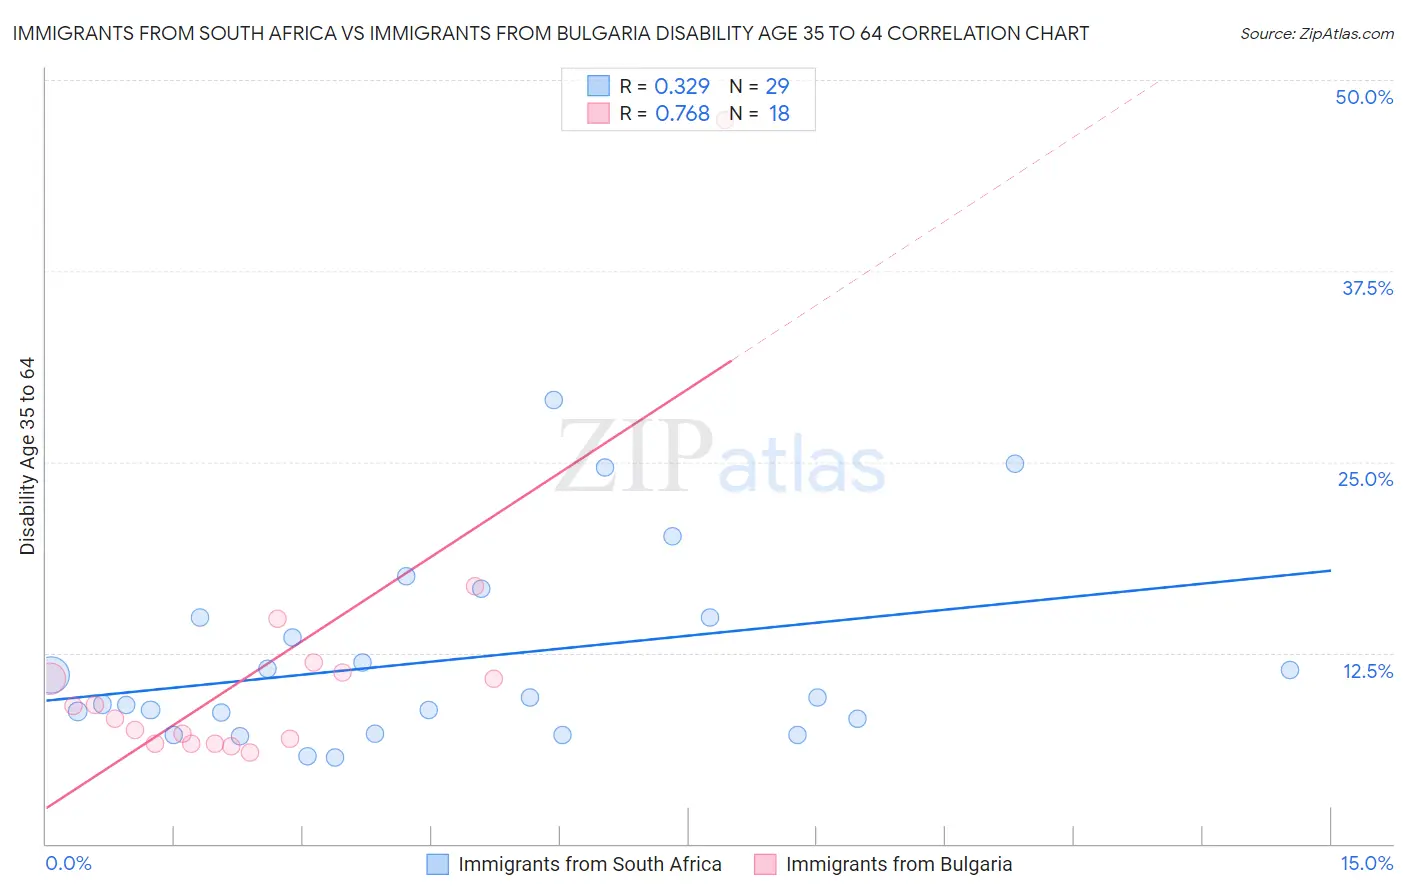 Immigrants from South Africa vs Immigrants from Bulgaria Disability Age 35 to 64